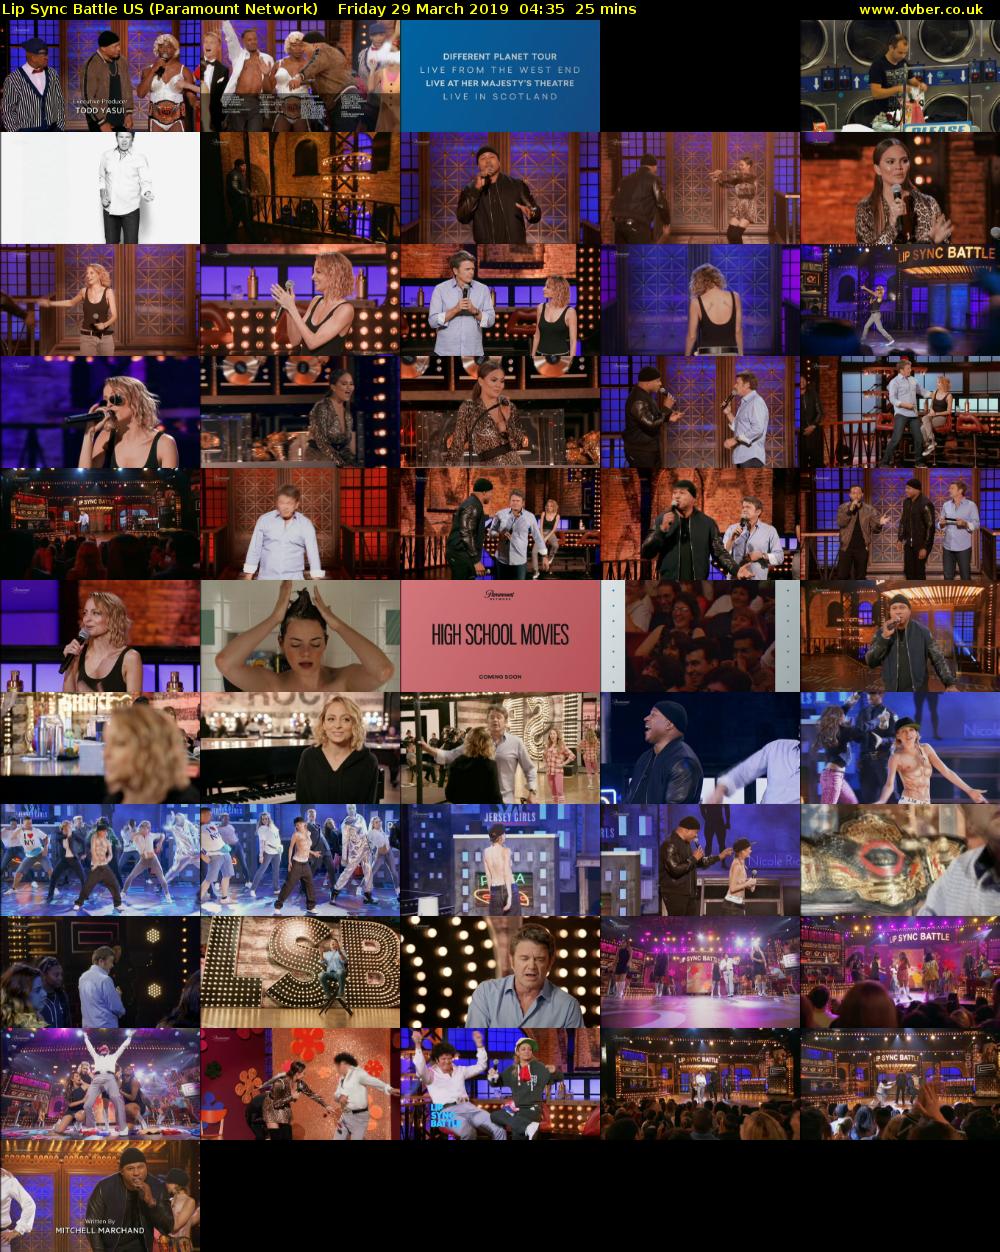 Lip Sync Battle US (Paramount Network) Friday 29 March 2019 04:35 - 05:00